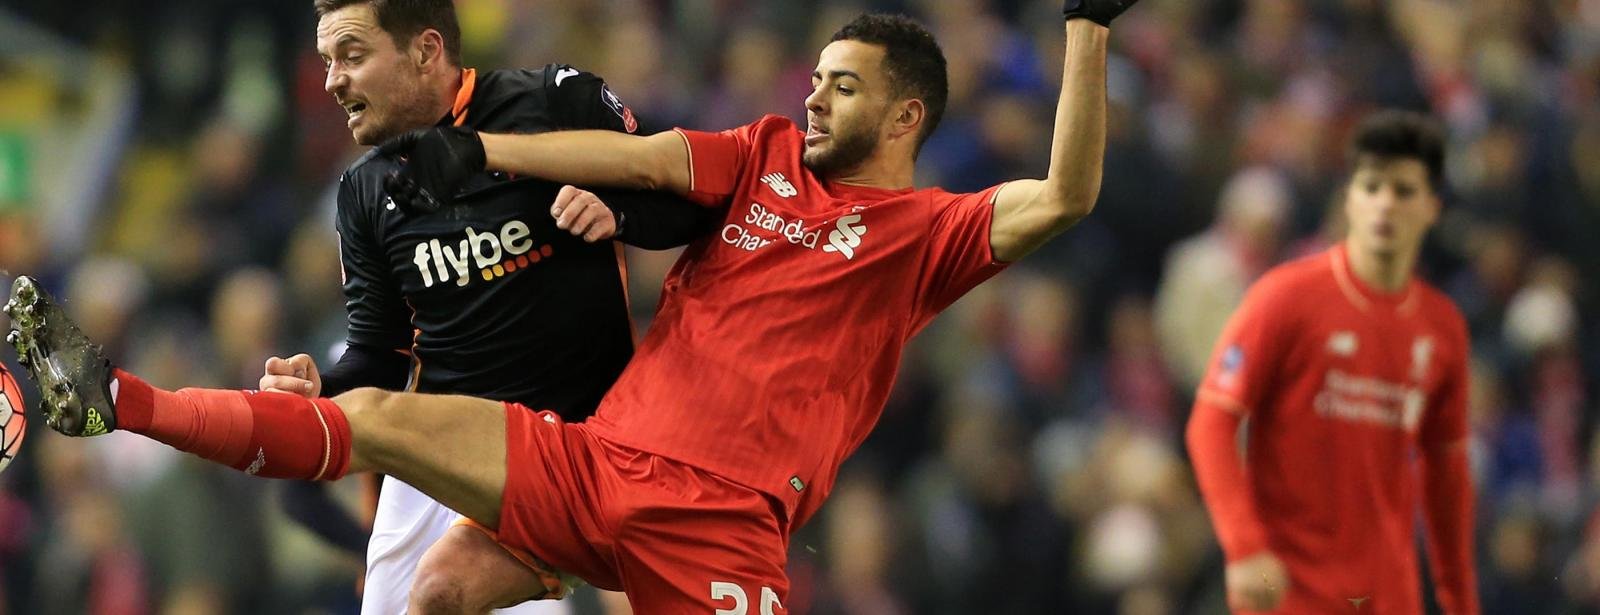 Kevin Stewart shows he has what it takes to play for Liverpool